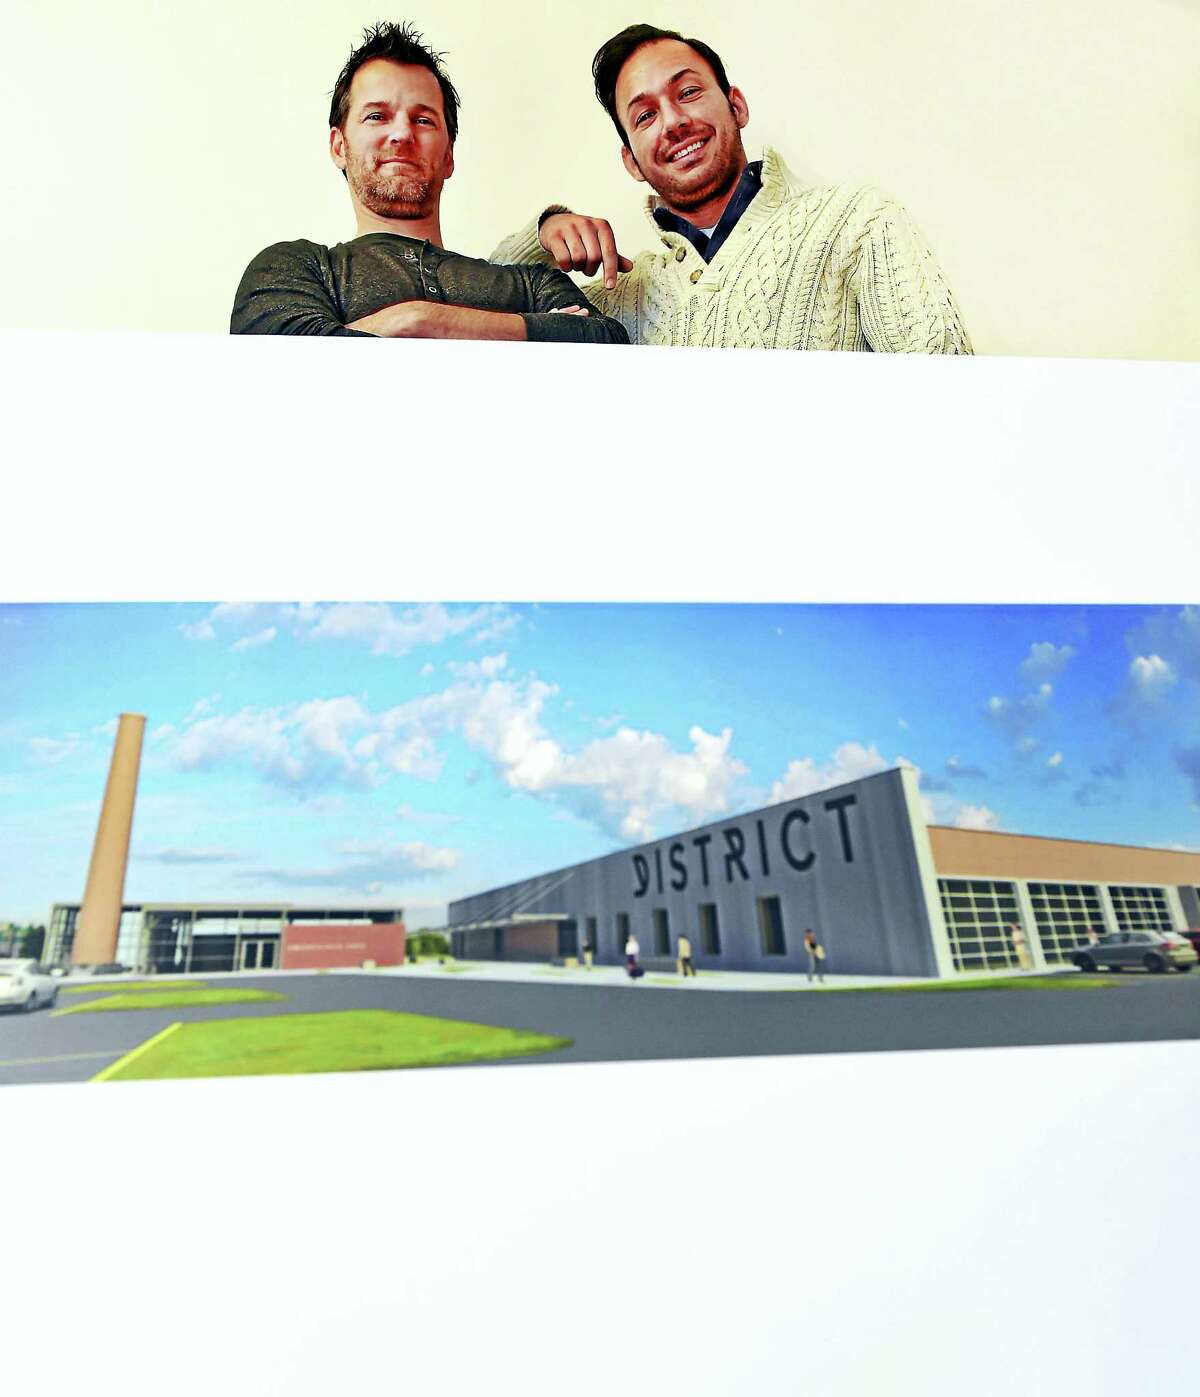 Eric O’Brien, owner of Urbane New Haven LLC, left, and David Salinis of Digital Surgeons, are expected to get approval necessary to convert the former Connecticut Transit bus depot at 470 James St. into space for technology and innovation-led companies. There will also be a restaurant and beer garden, entertainment and a kayak launch into the Mill River.